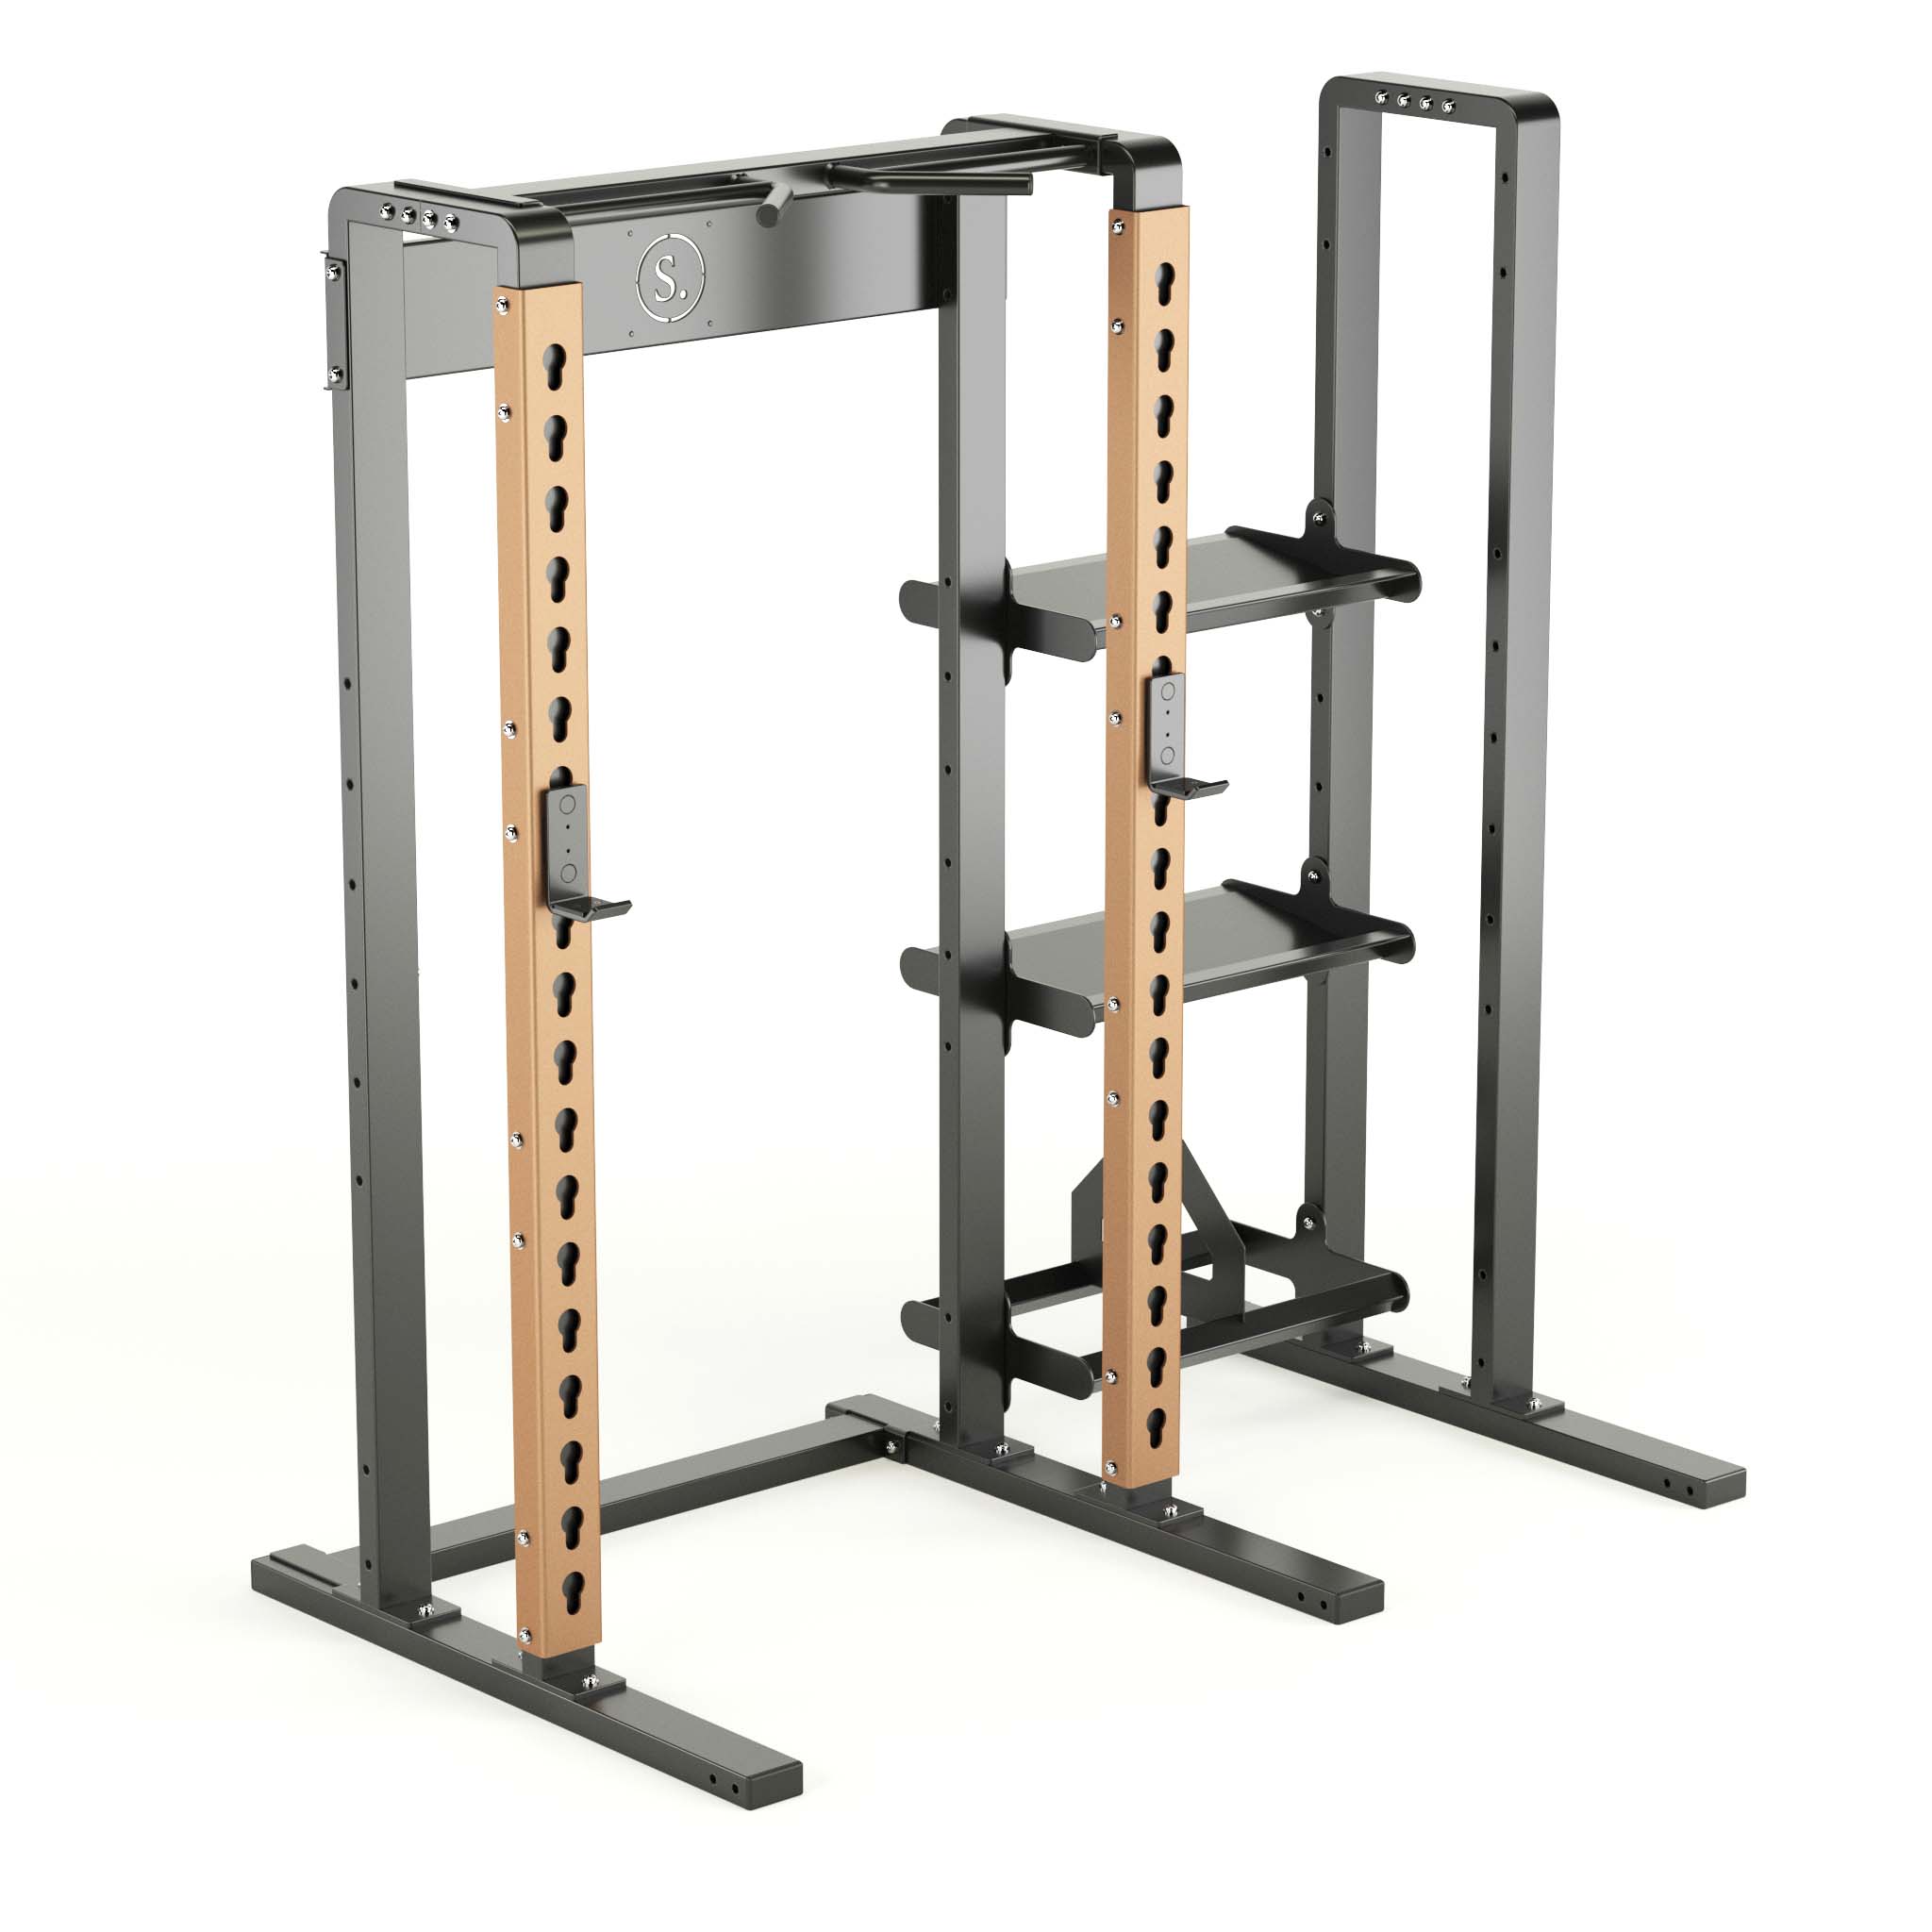 Solo half rack with compact storage in bronze